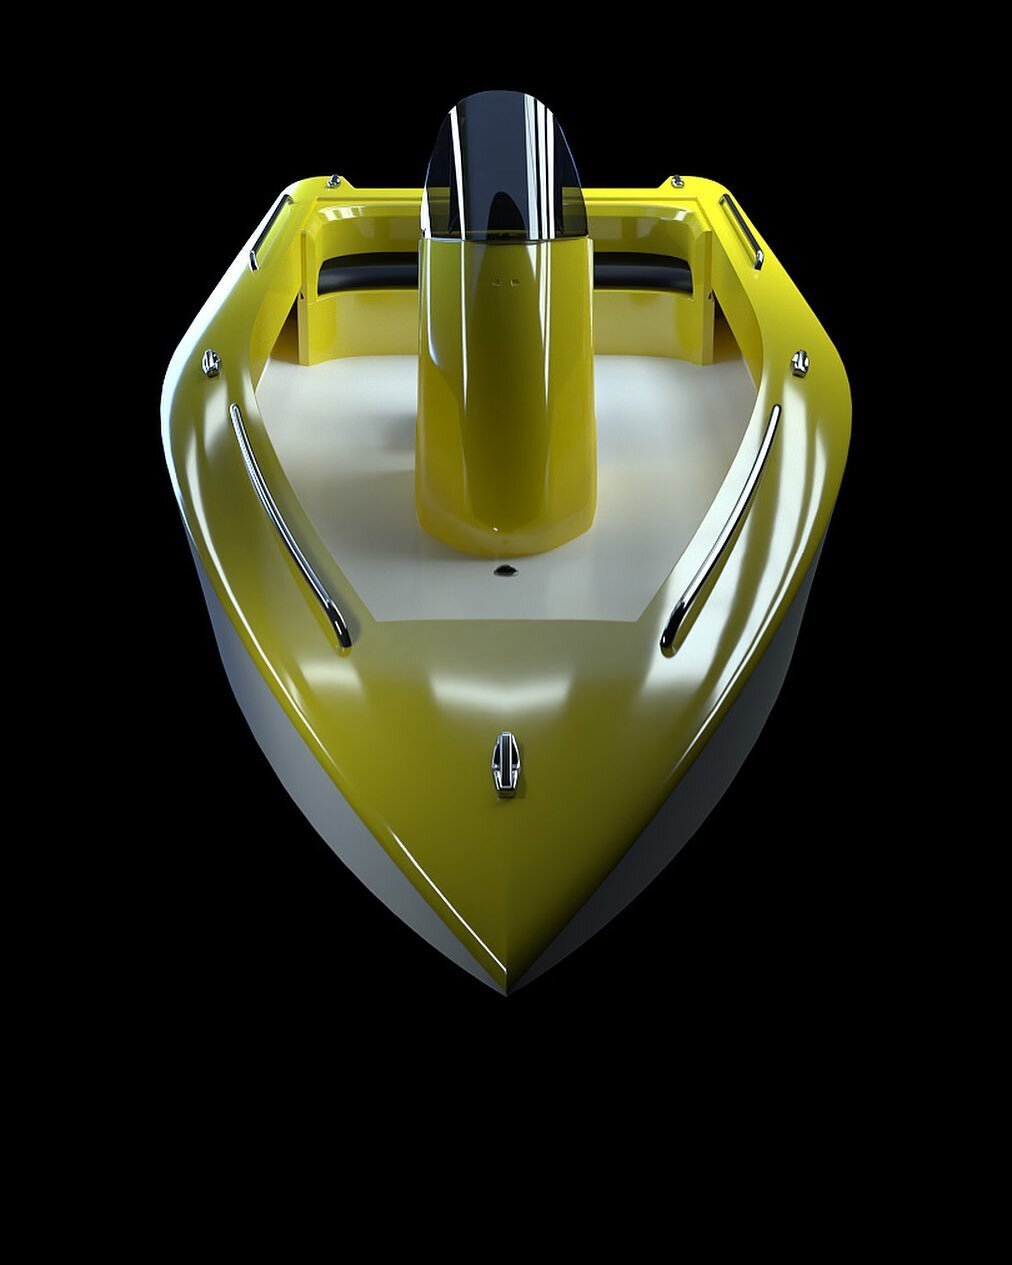 Are you ready to become the pilot?
The Parexo 17 Center Console is waiting for you!

JOIN THE RIDE!
#Parexo #boating #saltlife #ocean #fun #speedboat #racing #mercury